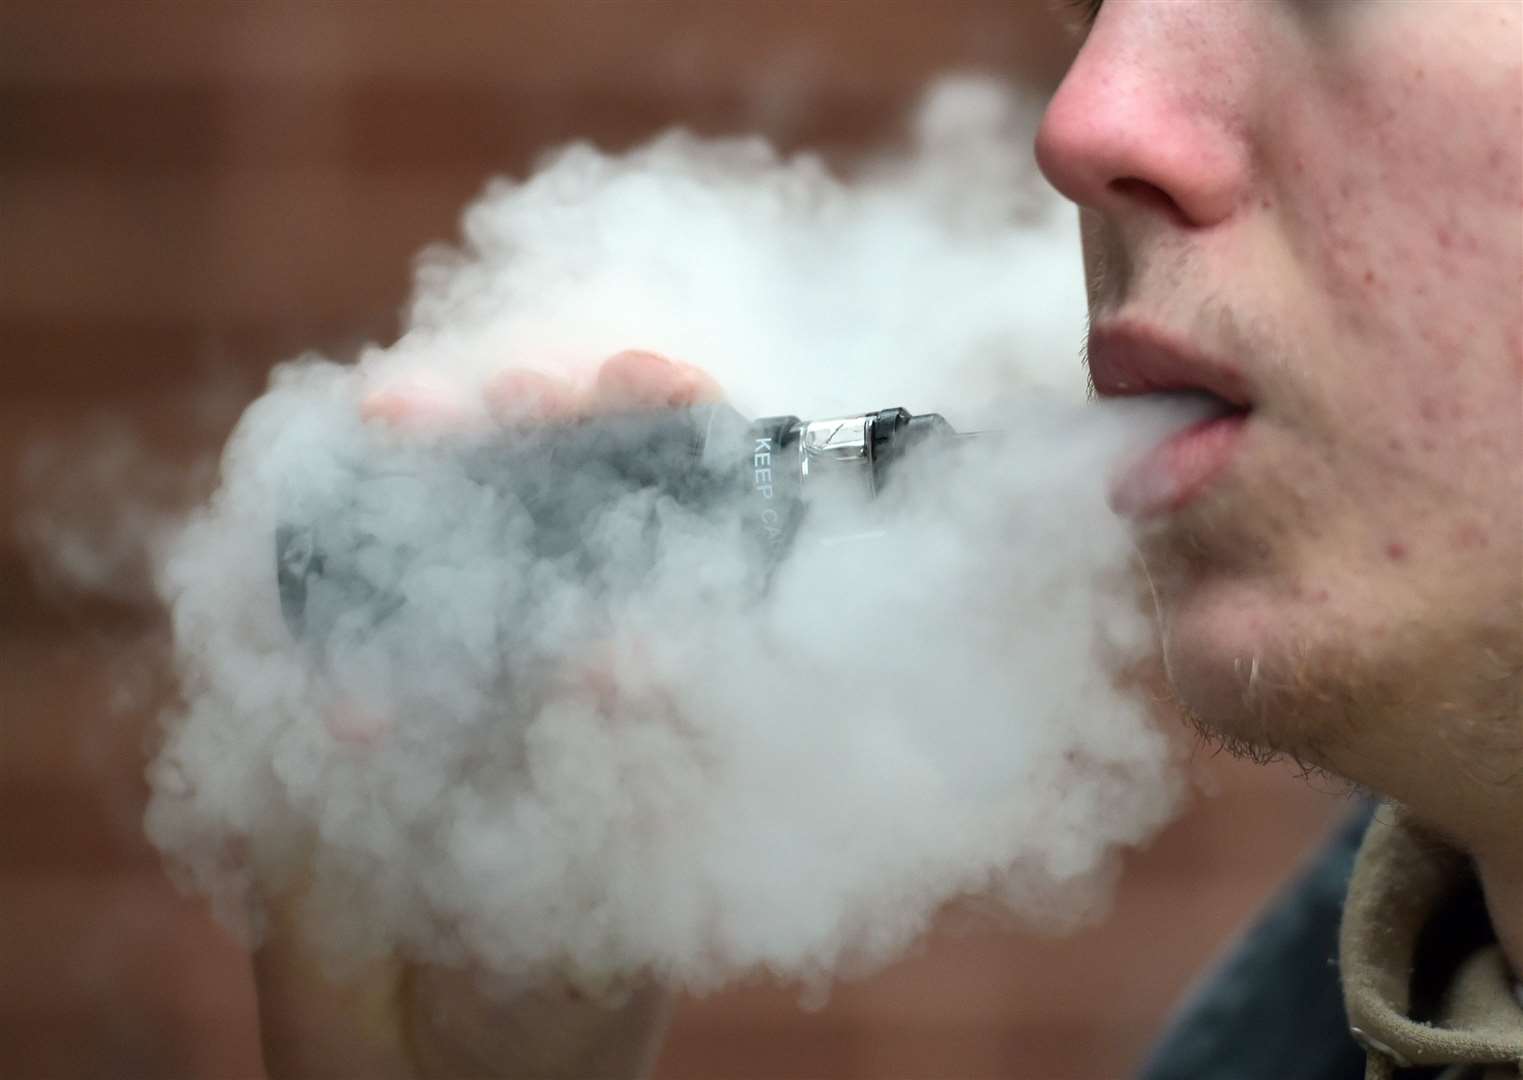 The Government is holding an eight-week consultation amid concerns over youth vaping (Nicholas Ansell/PA)